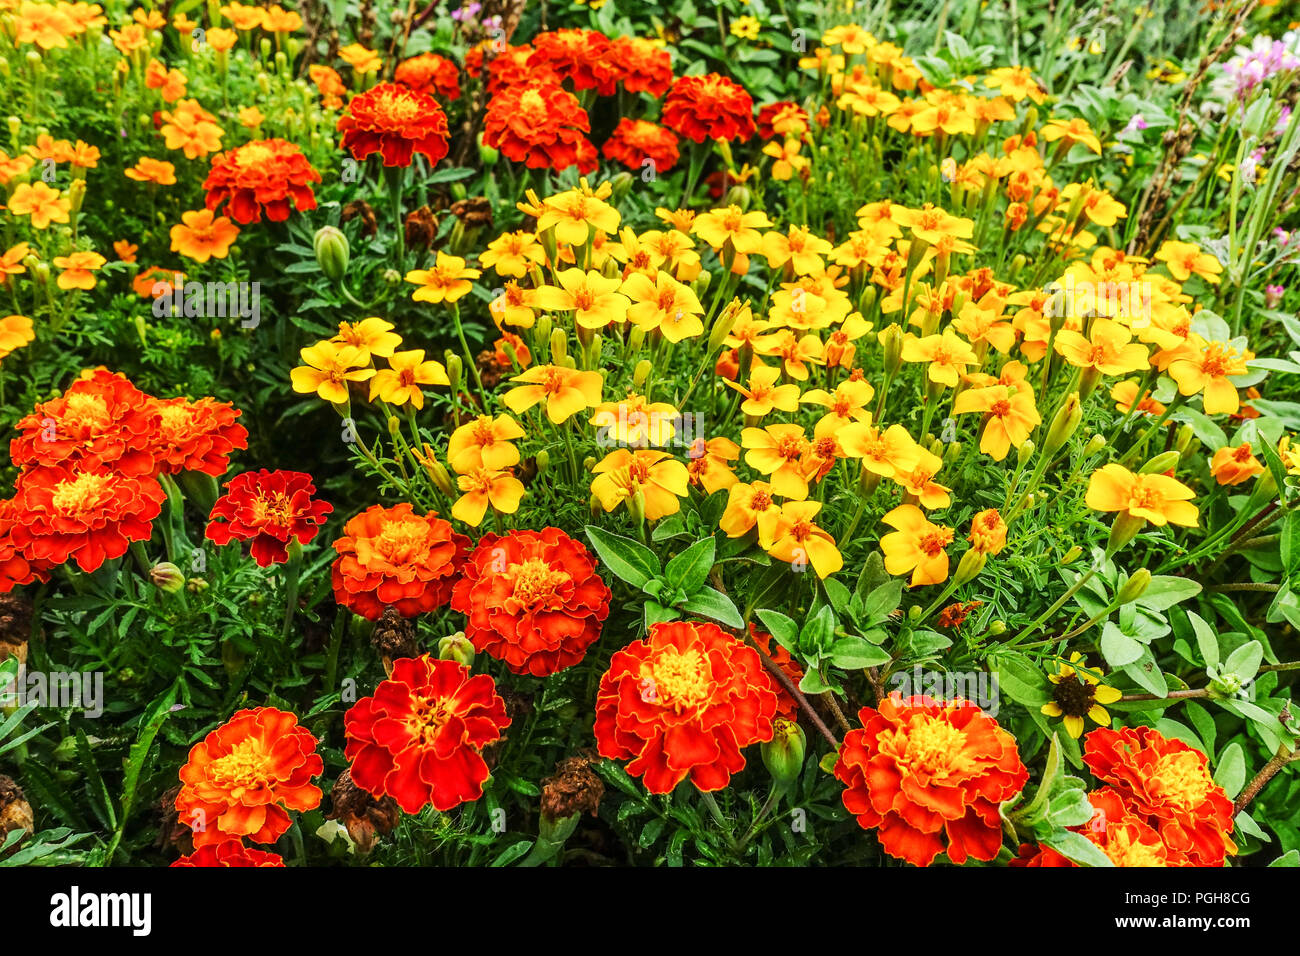 French Marigolds, Red Tagetes patula, Yellow Tagetes tenuifolia, Mixed marigolds annual flower bed plants Stock Photo